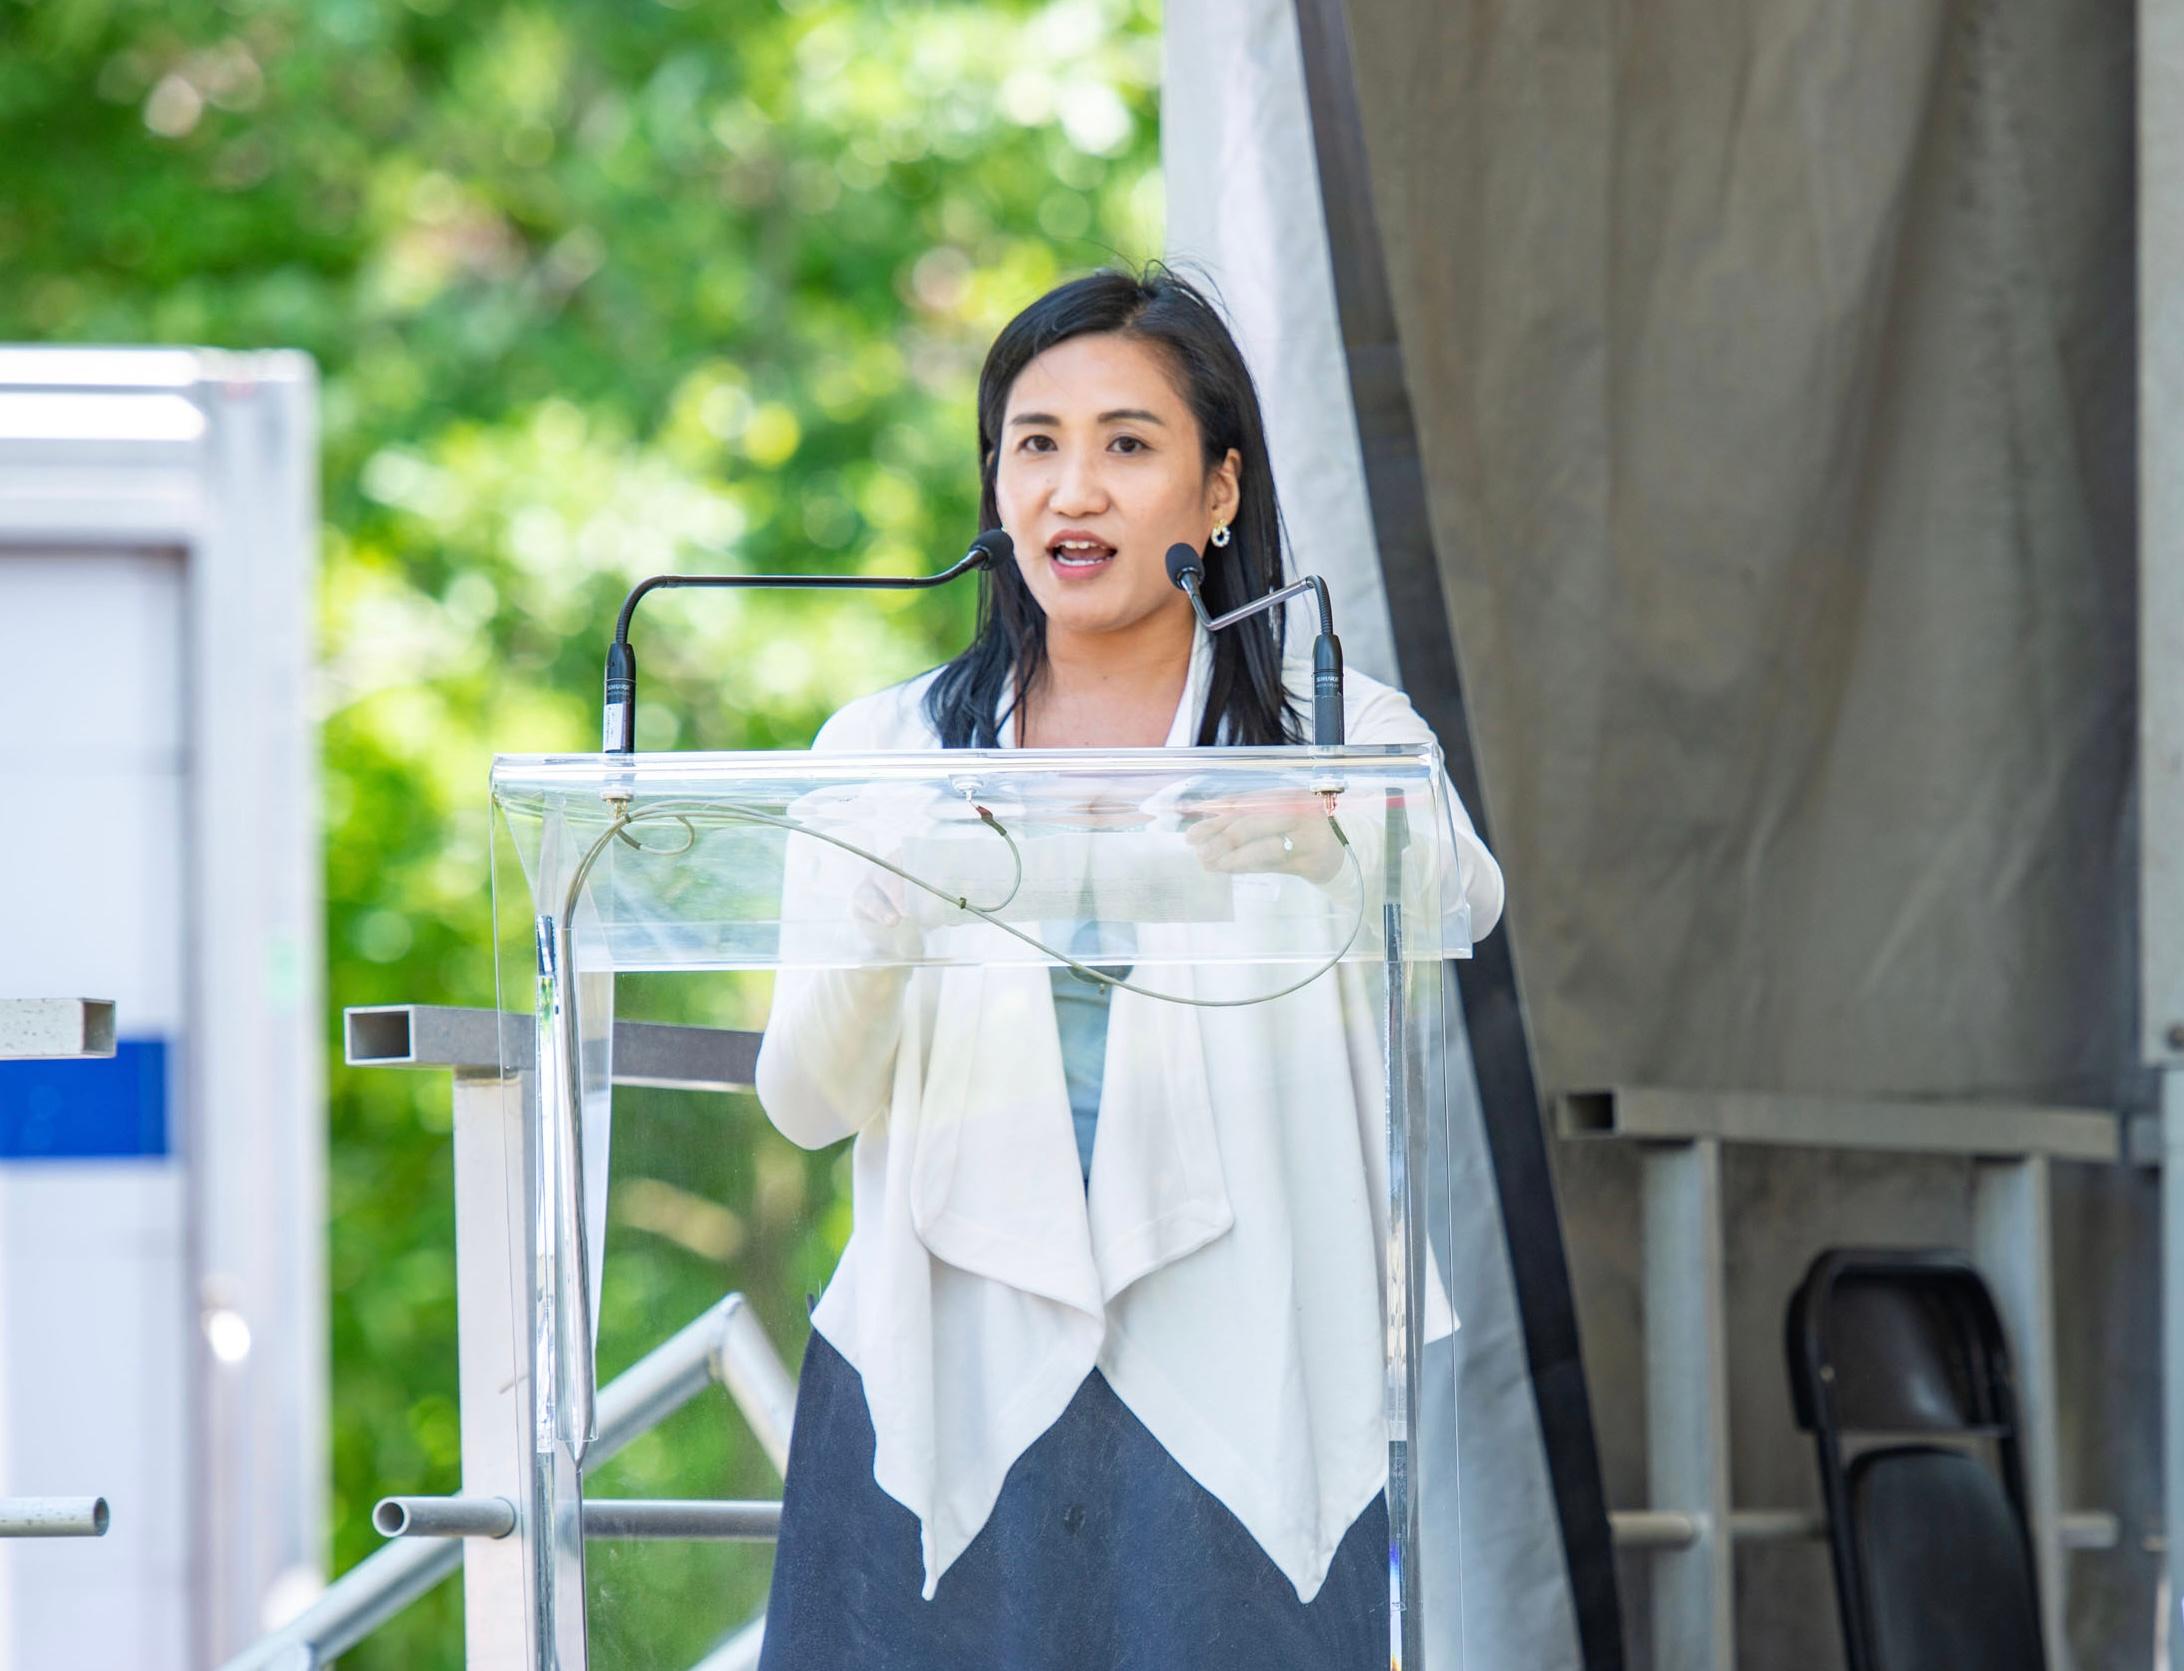 The Director of the Hong Kong Economic and Trade Office (Toronto), Ms Emily Mo, delivers a speech at the opening ceremony of the Toronto International Dragon Boat Festival 2023 held on June 17 (Toronto time) on Centre Island, Toronto.